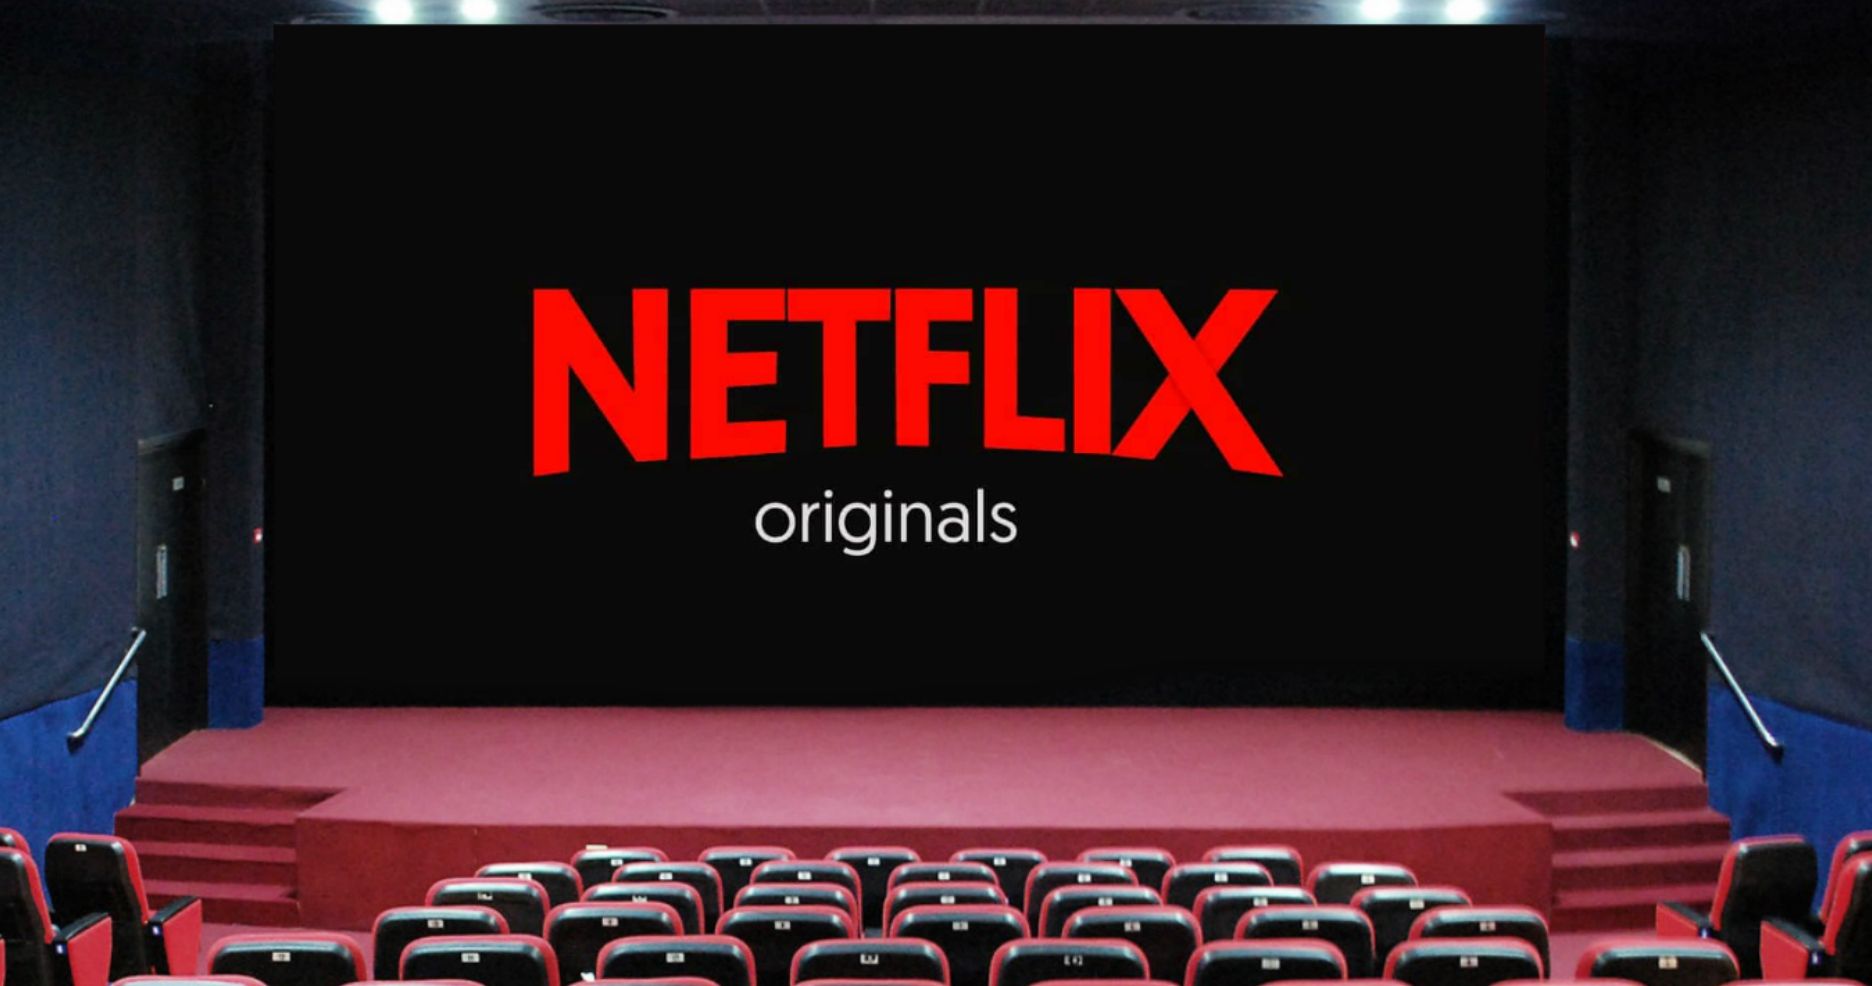 Netflix Has 40% Fewer Movies Now Than in 2014